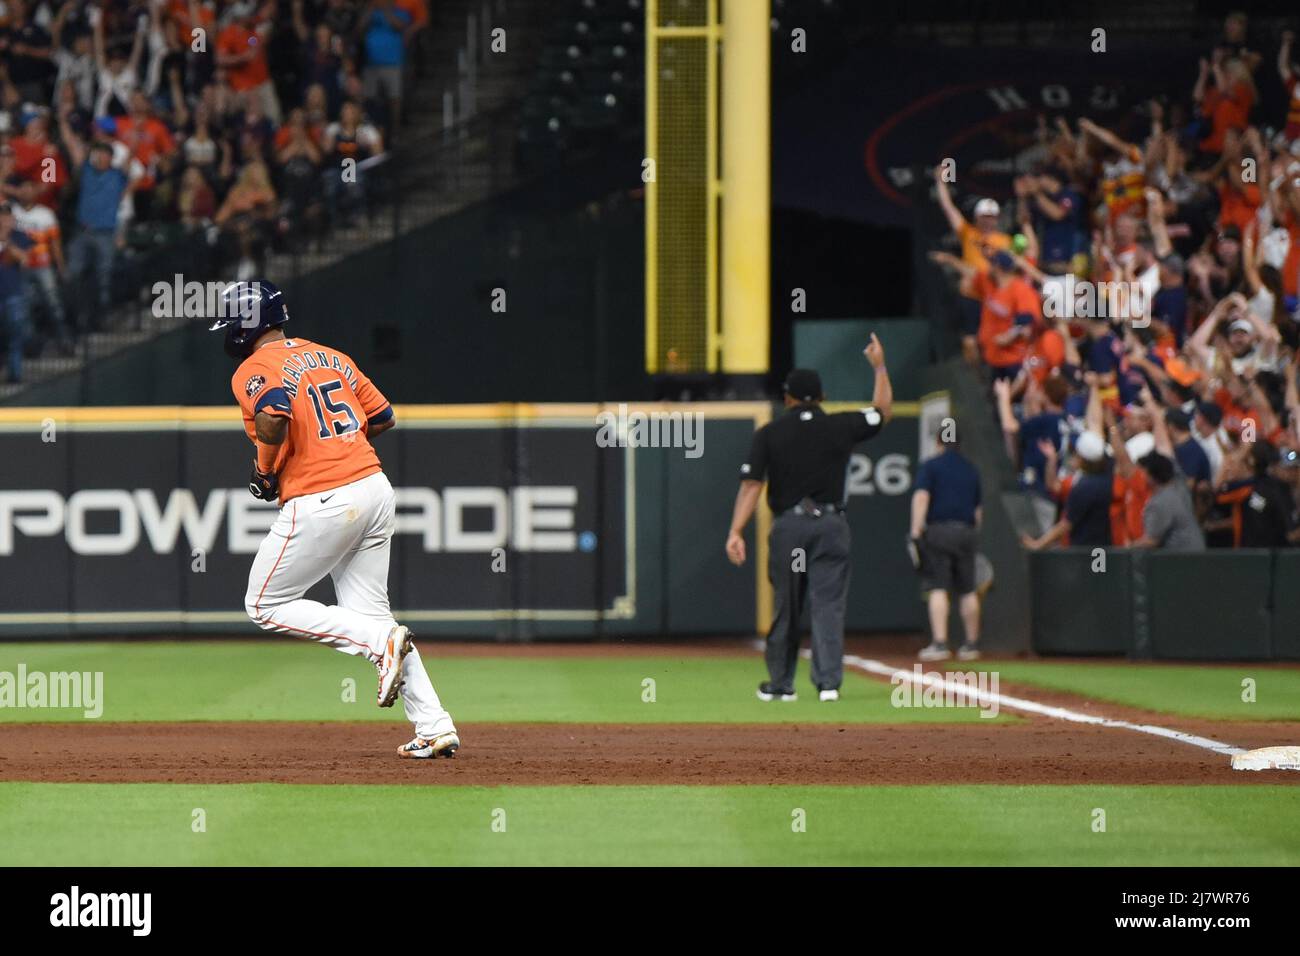 Houston Astros catcher Martin Maldonado (15) circles the baes after hitting a home run in the bottom of the second inning during the MLB game between Stock Photo